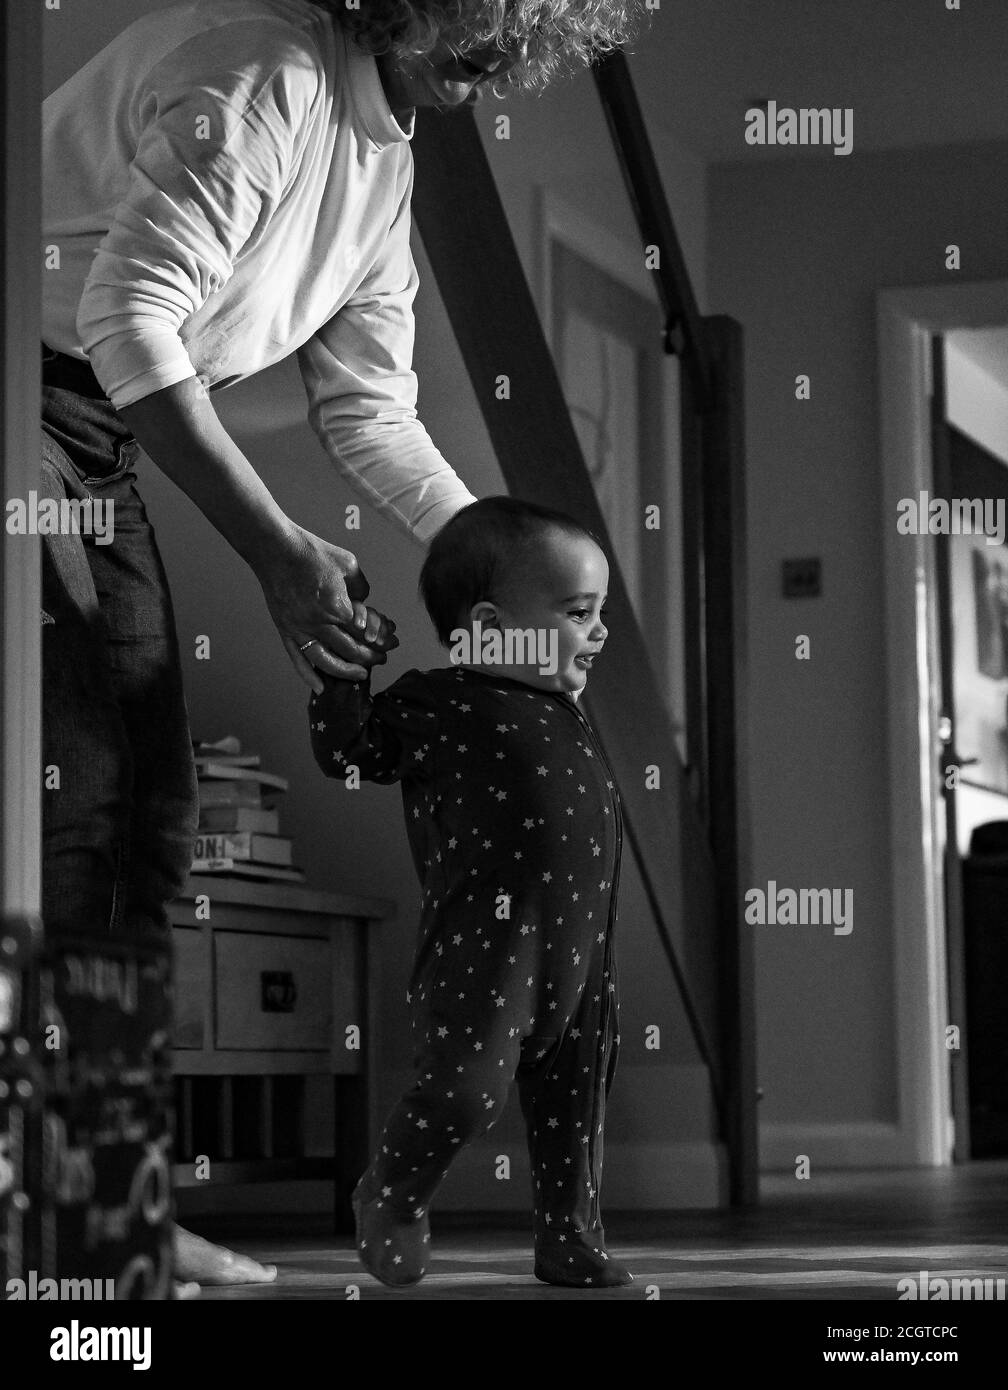 Young 10 month old baby boy learning to walk with his grandmother Stock Photo